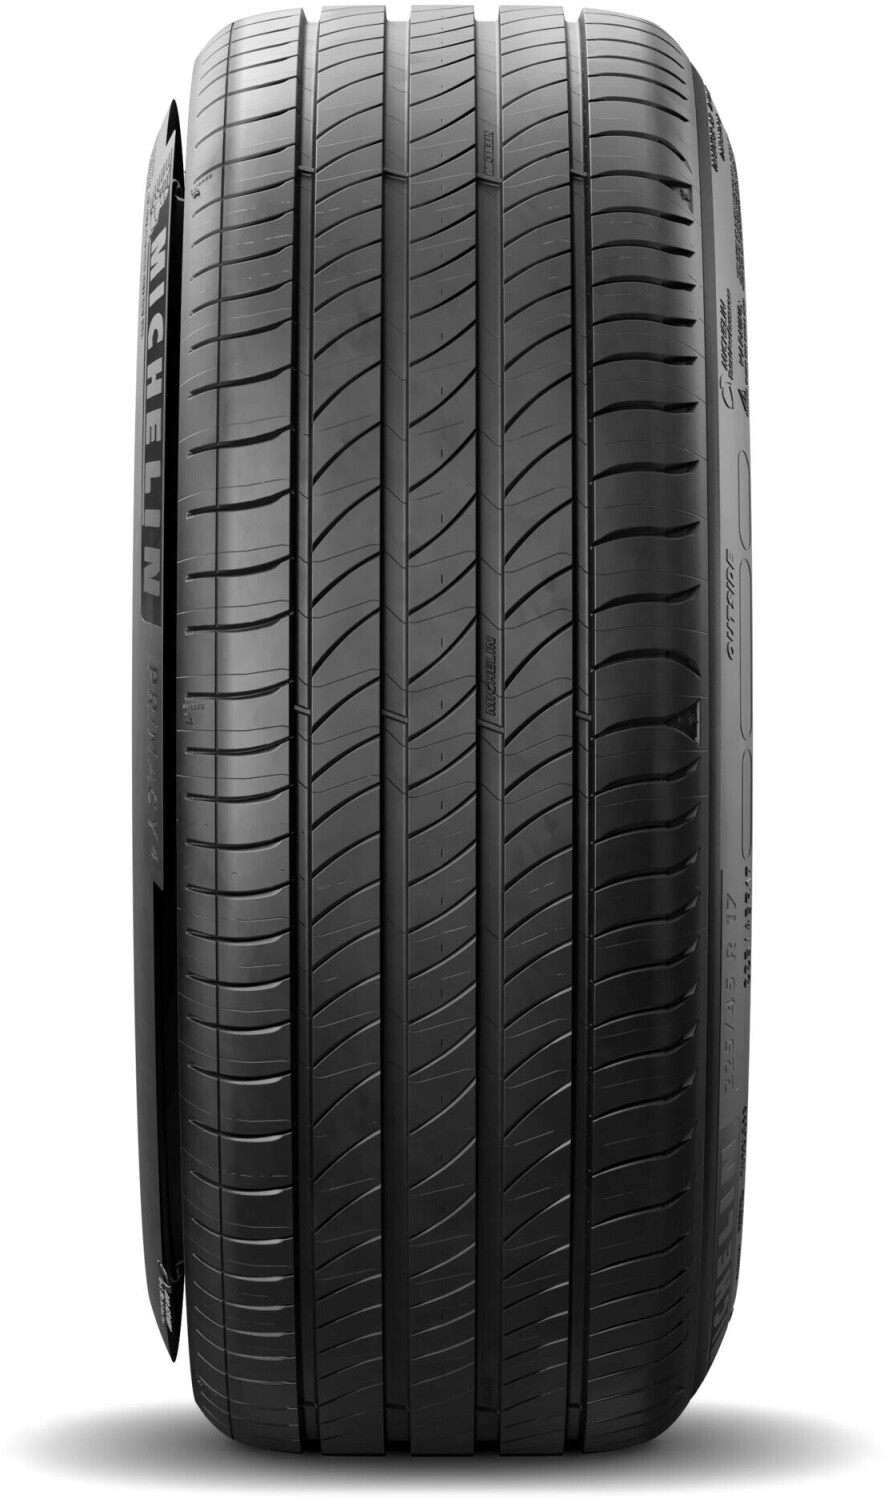 Buy Michelin Primacy 4 225/45 R17 (Today) Deals – S1 £108.51 from XL 94V on Best